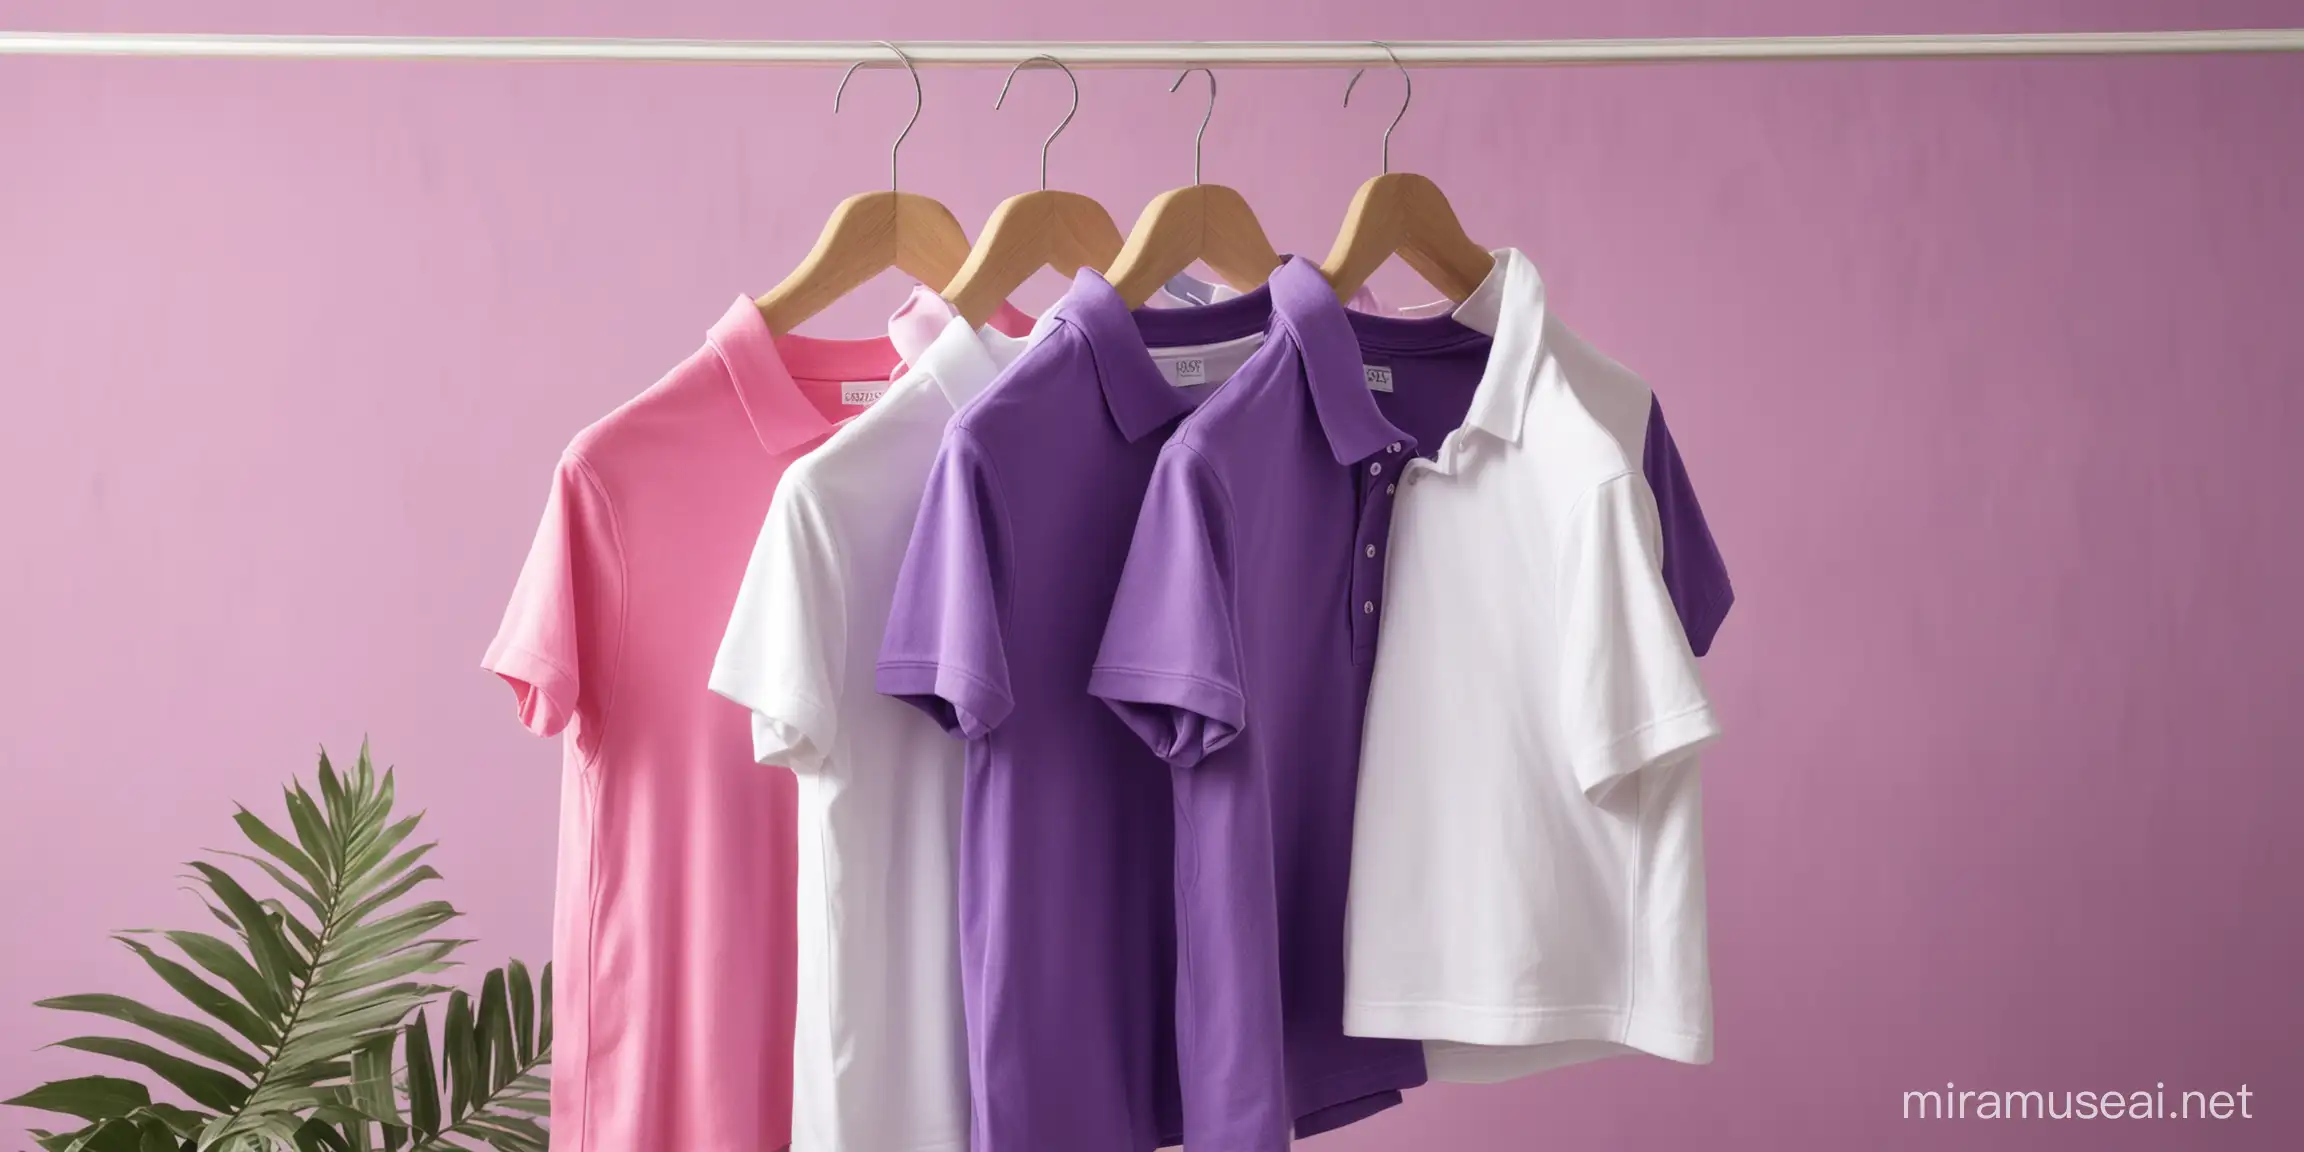 Summer Fashion Vibrant Pink Purple and White Polo TShirts with Leaf Elements